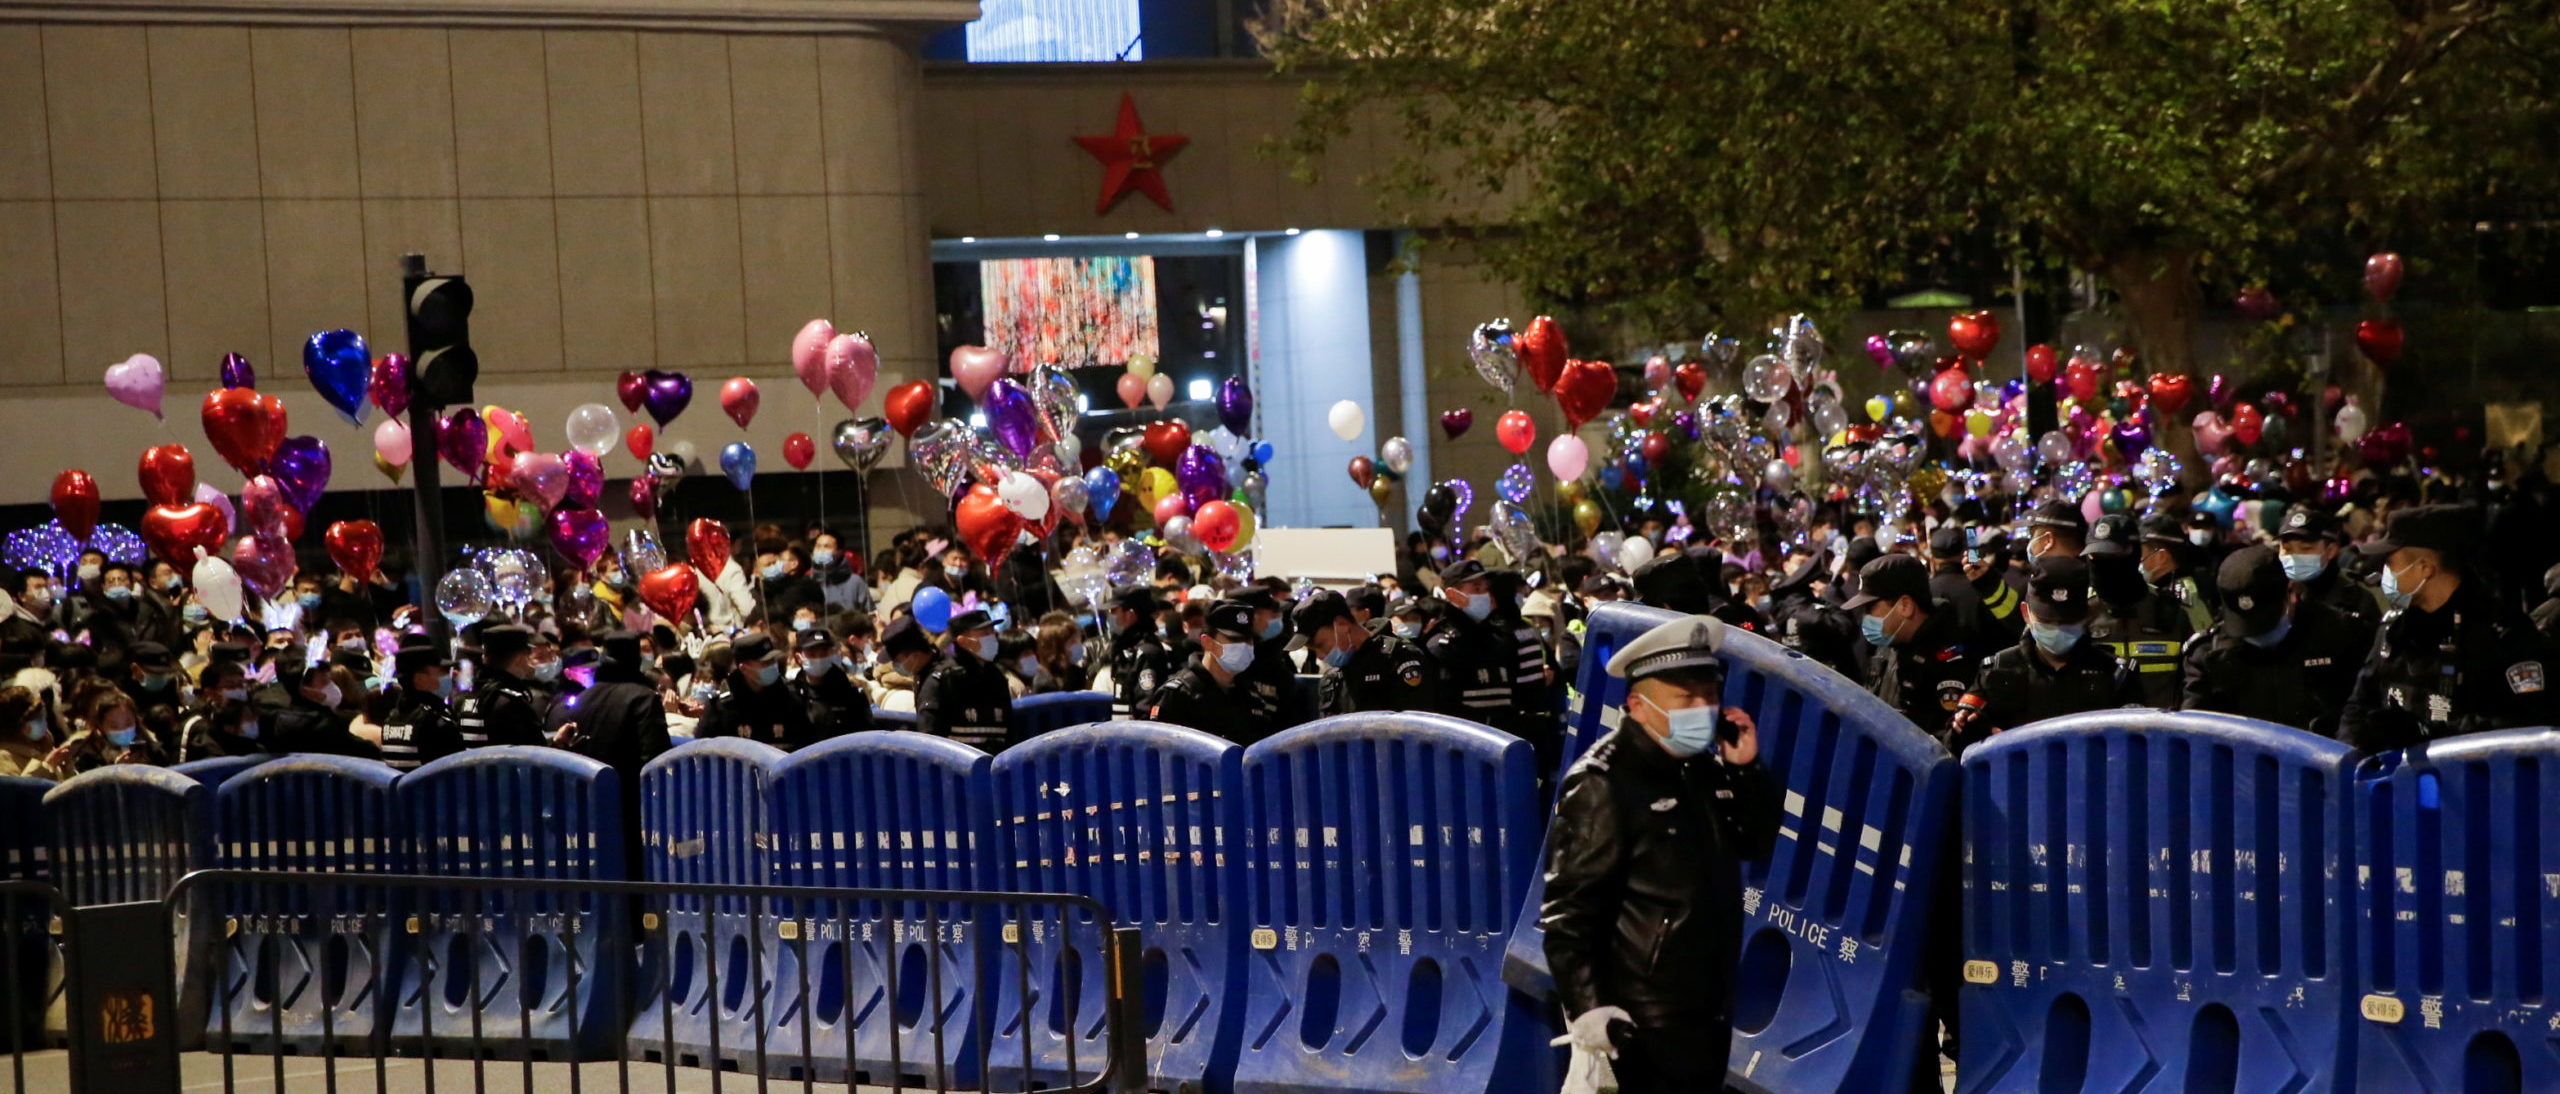 A police officer walks past barriers as people gather to celebrate the arrival of the new year during the coronavirus disease (COVID-19) outbreak in Wuhan, China December 31, 2020. REUTERS/Tingshu Wang